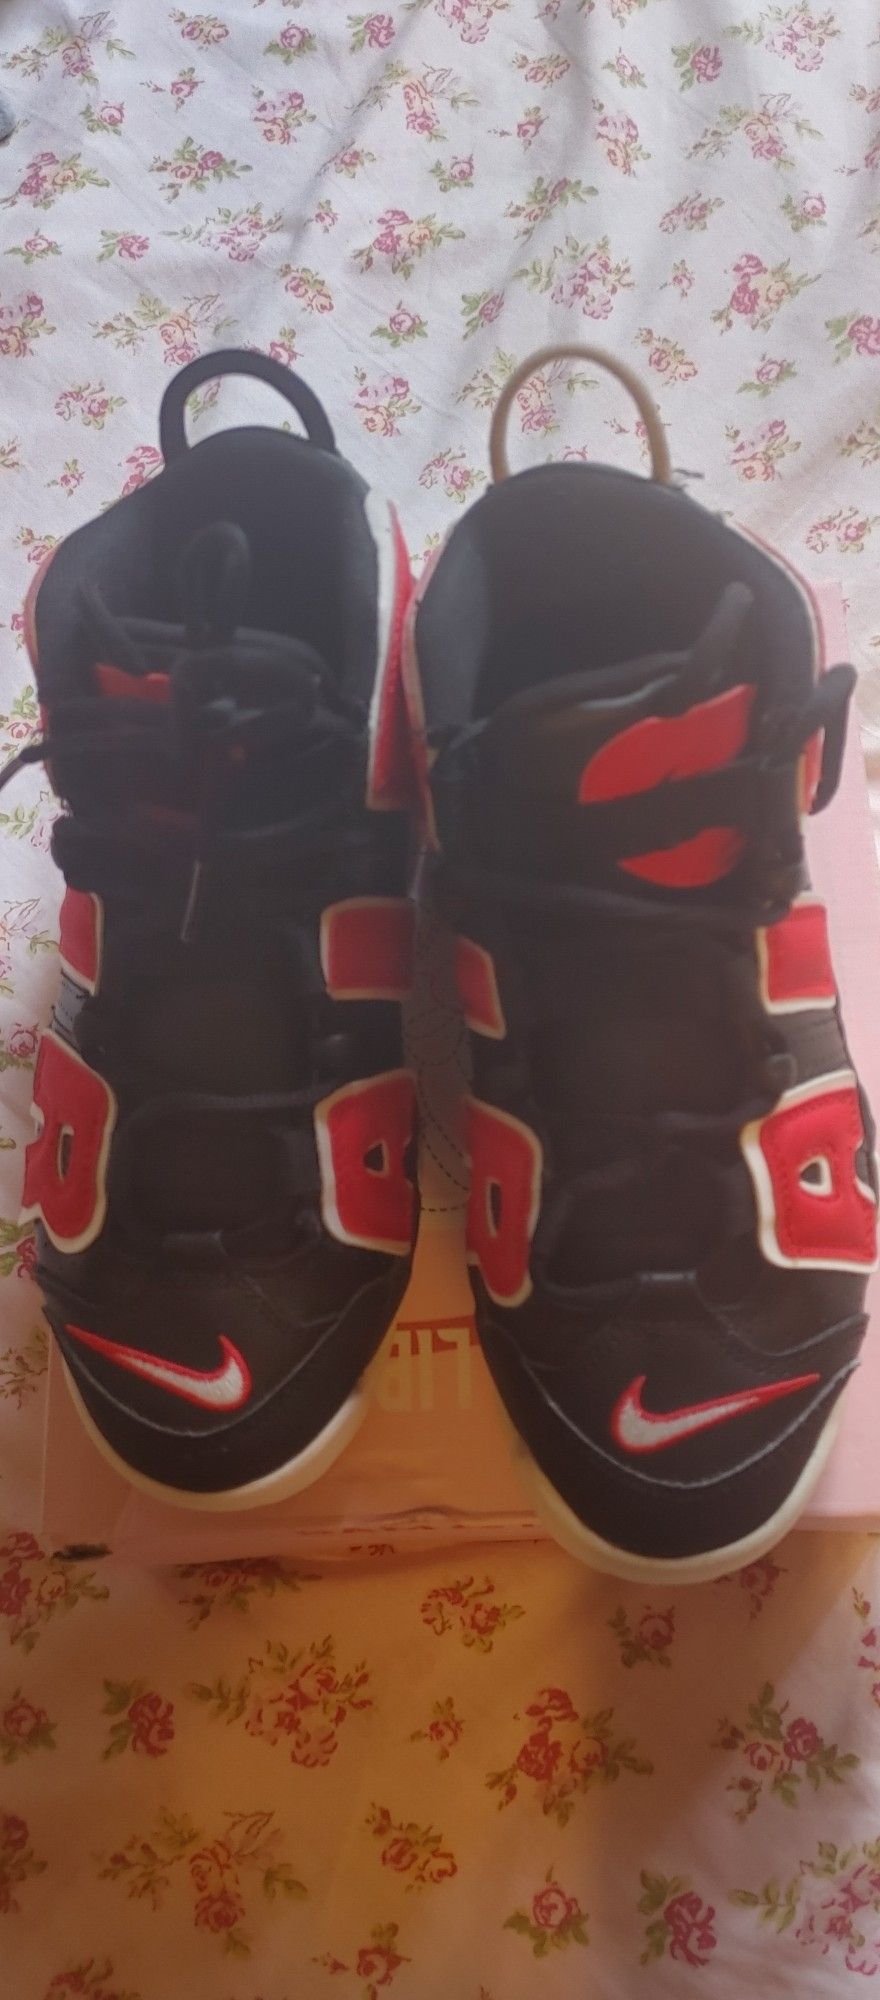 $150 Nike Air More Uptempo Black&Red Size 7